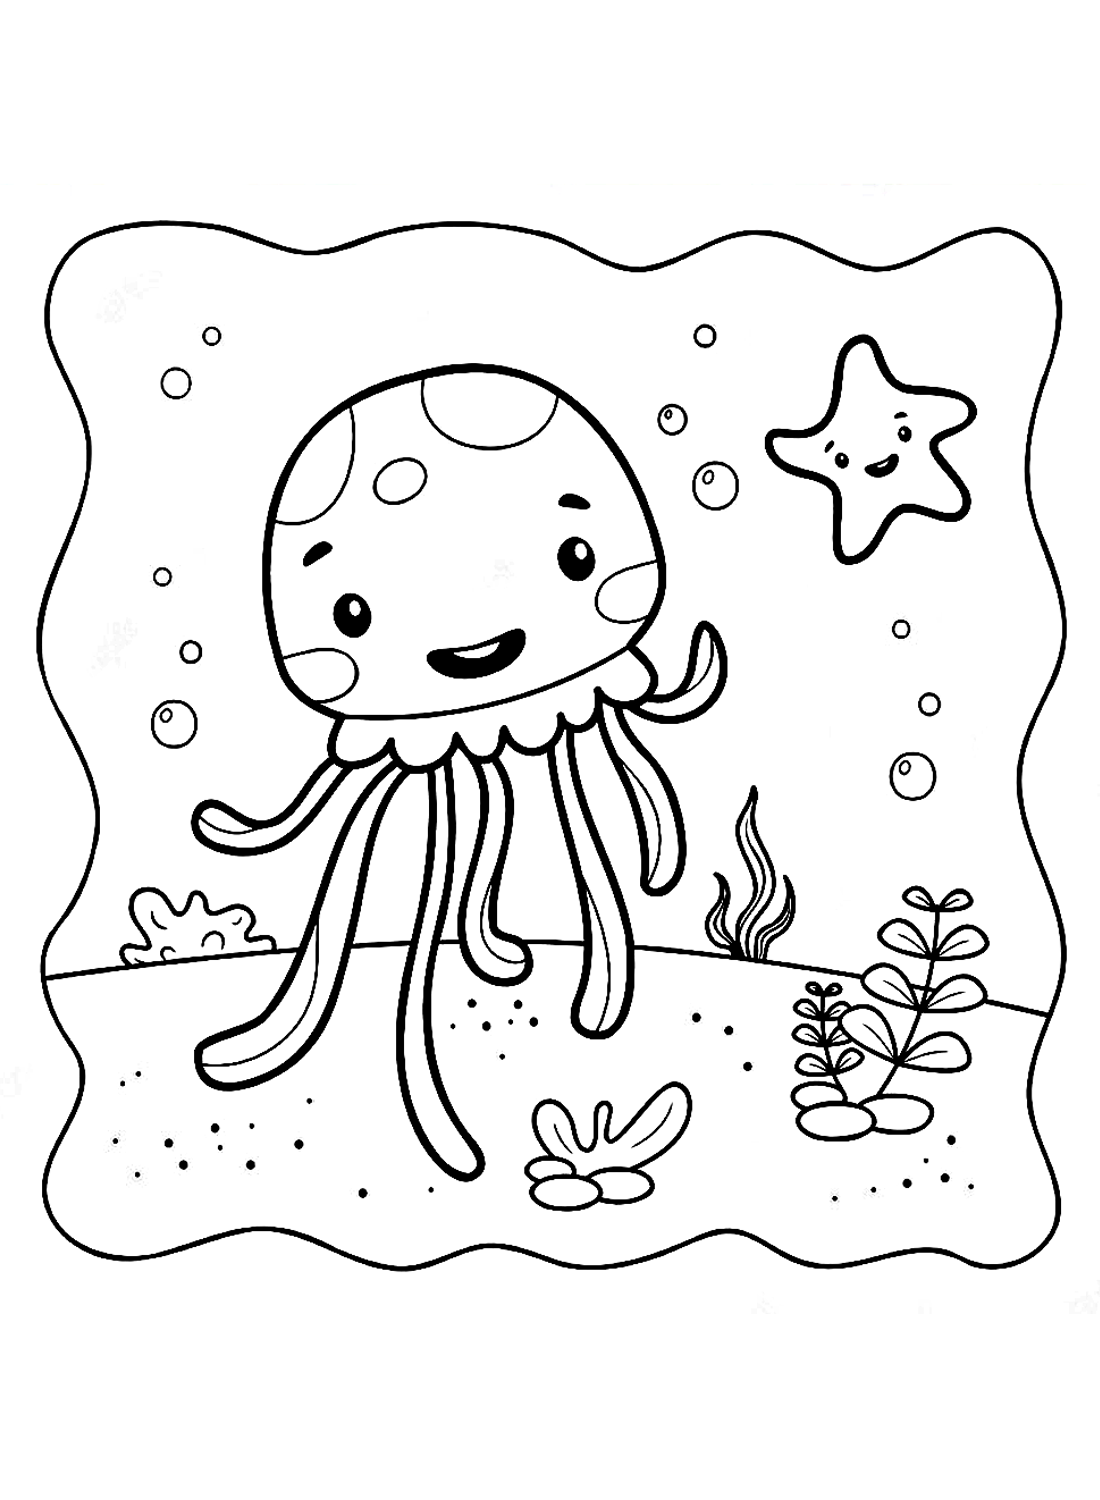 A lovely Jellyfish from Jellyfish